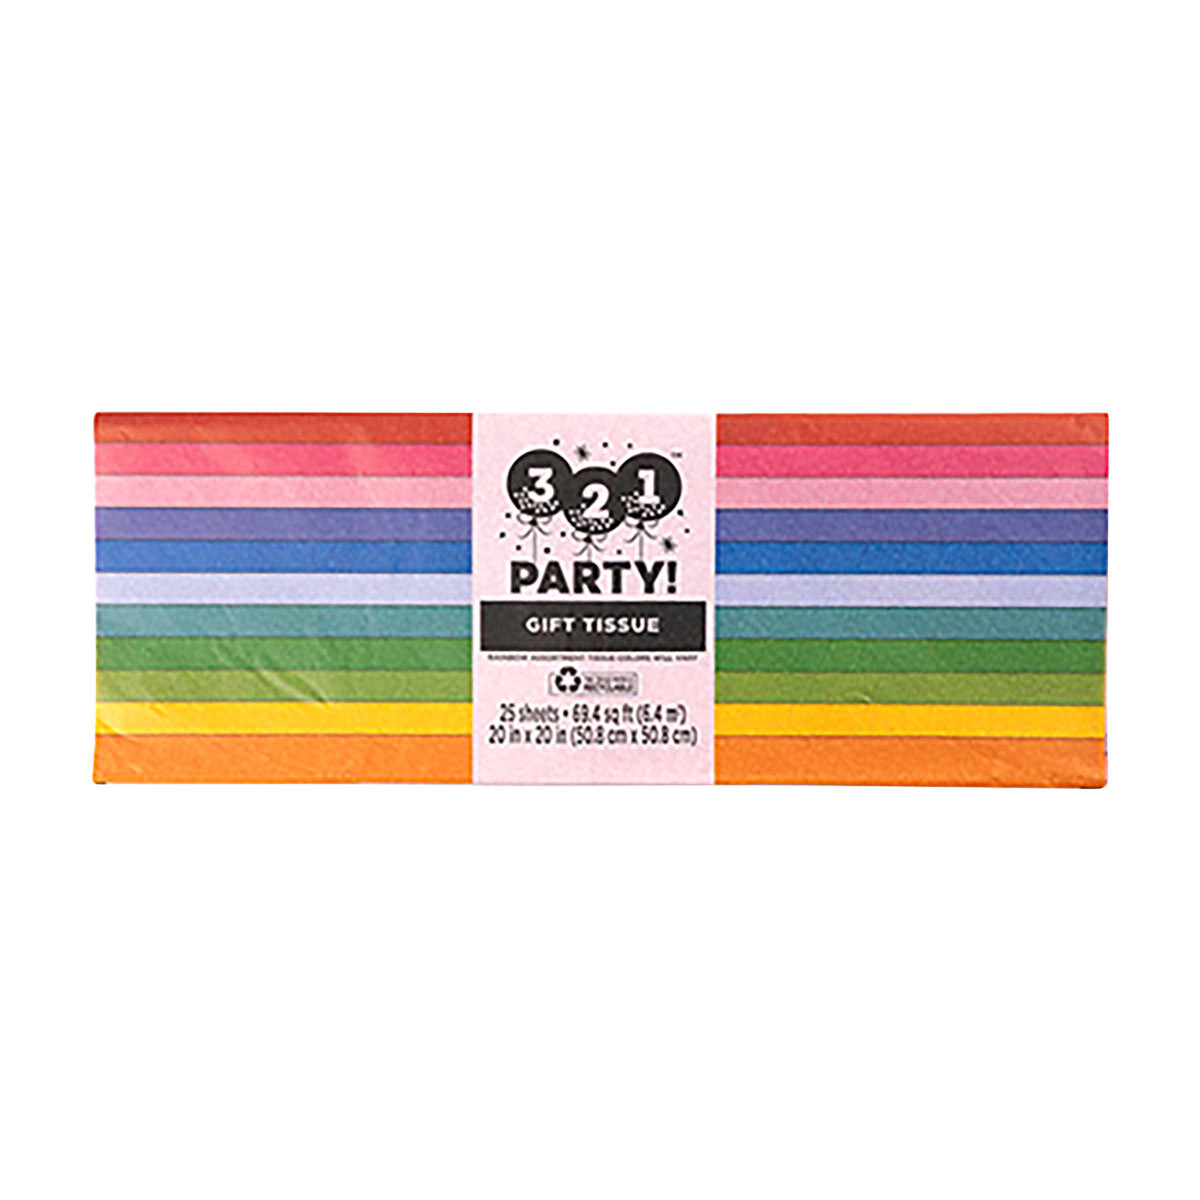 321 Party! Color Gift Tissue, 25 ct